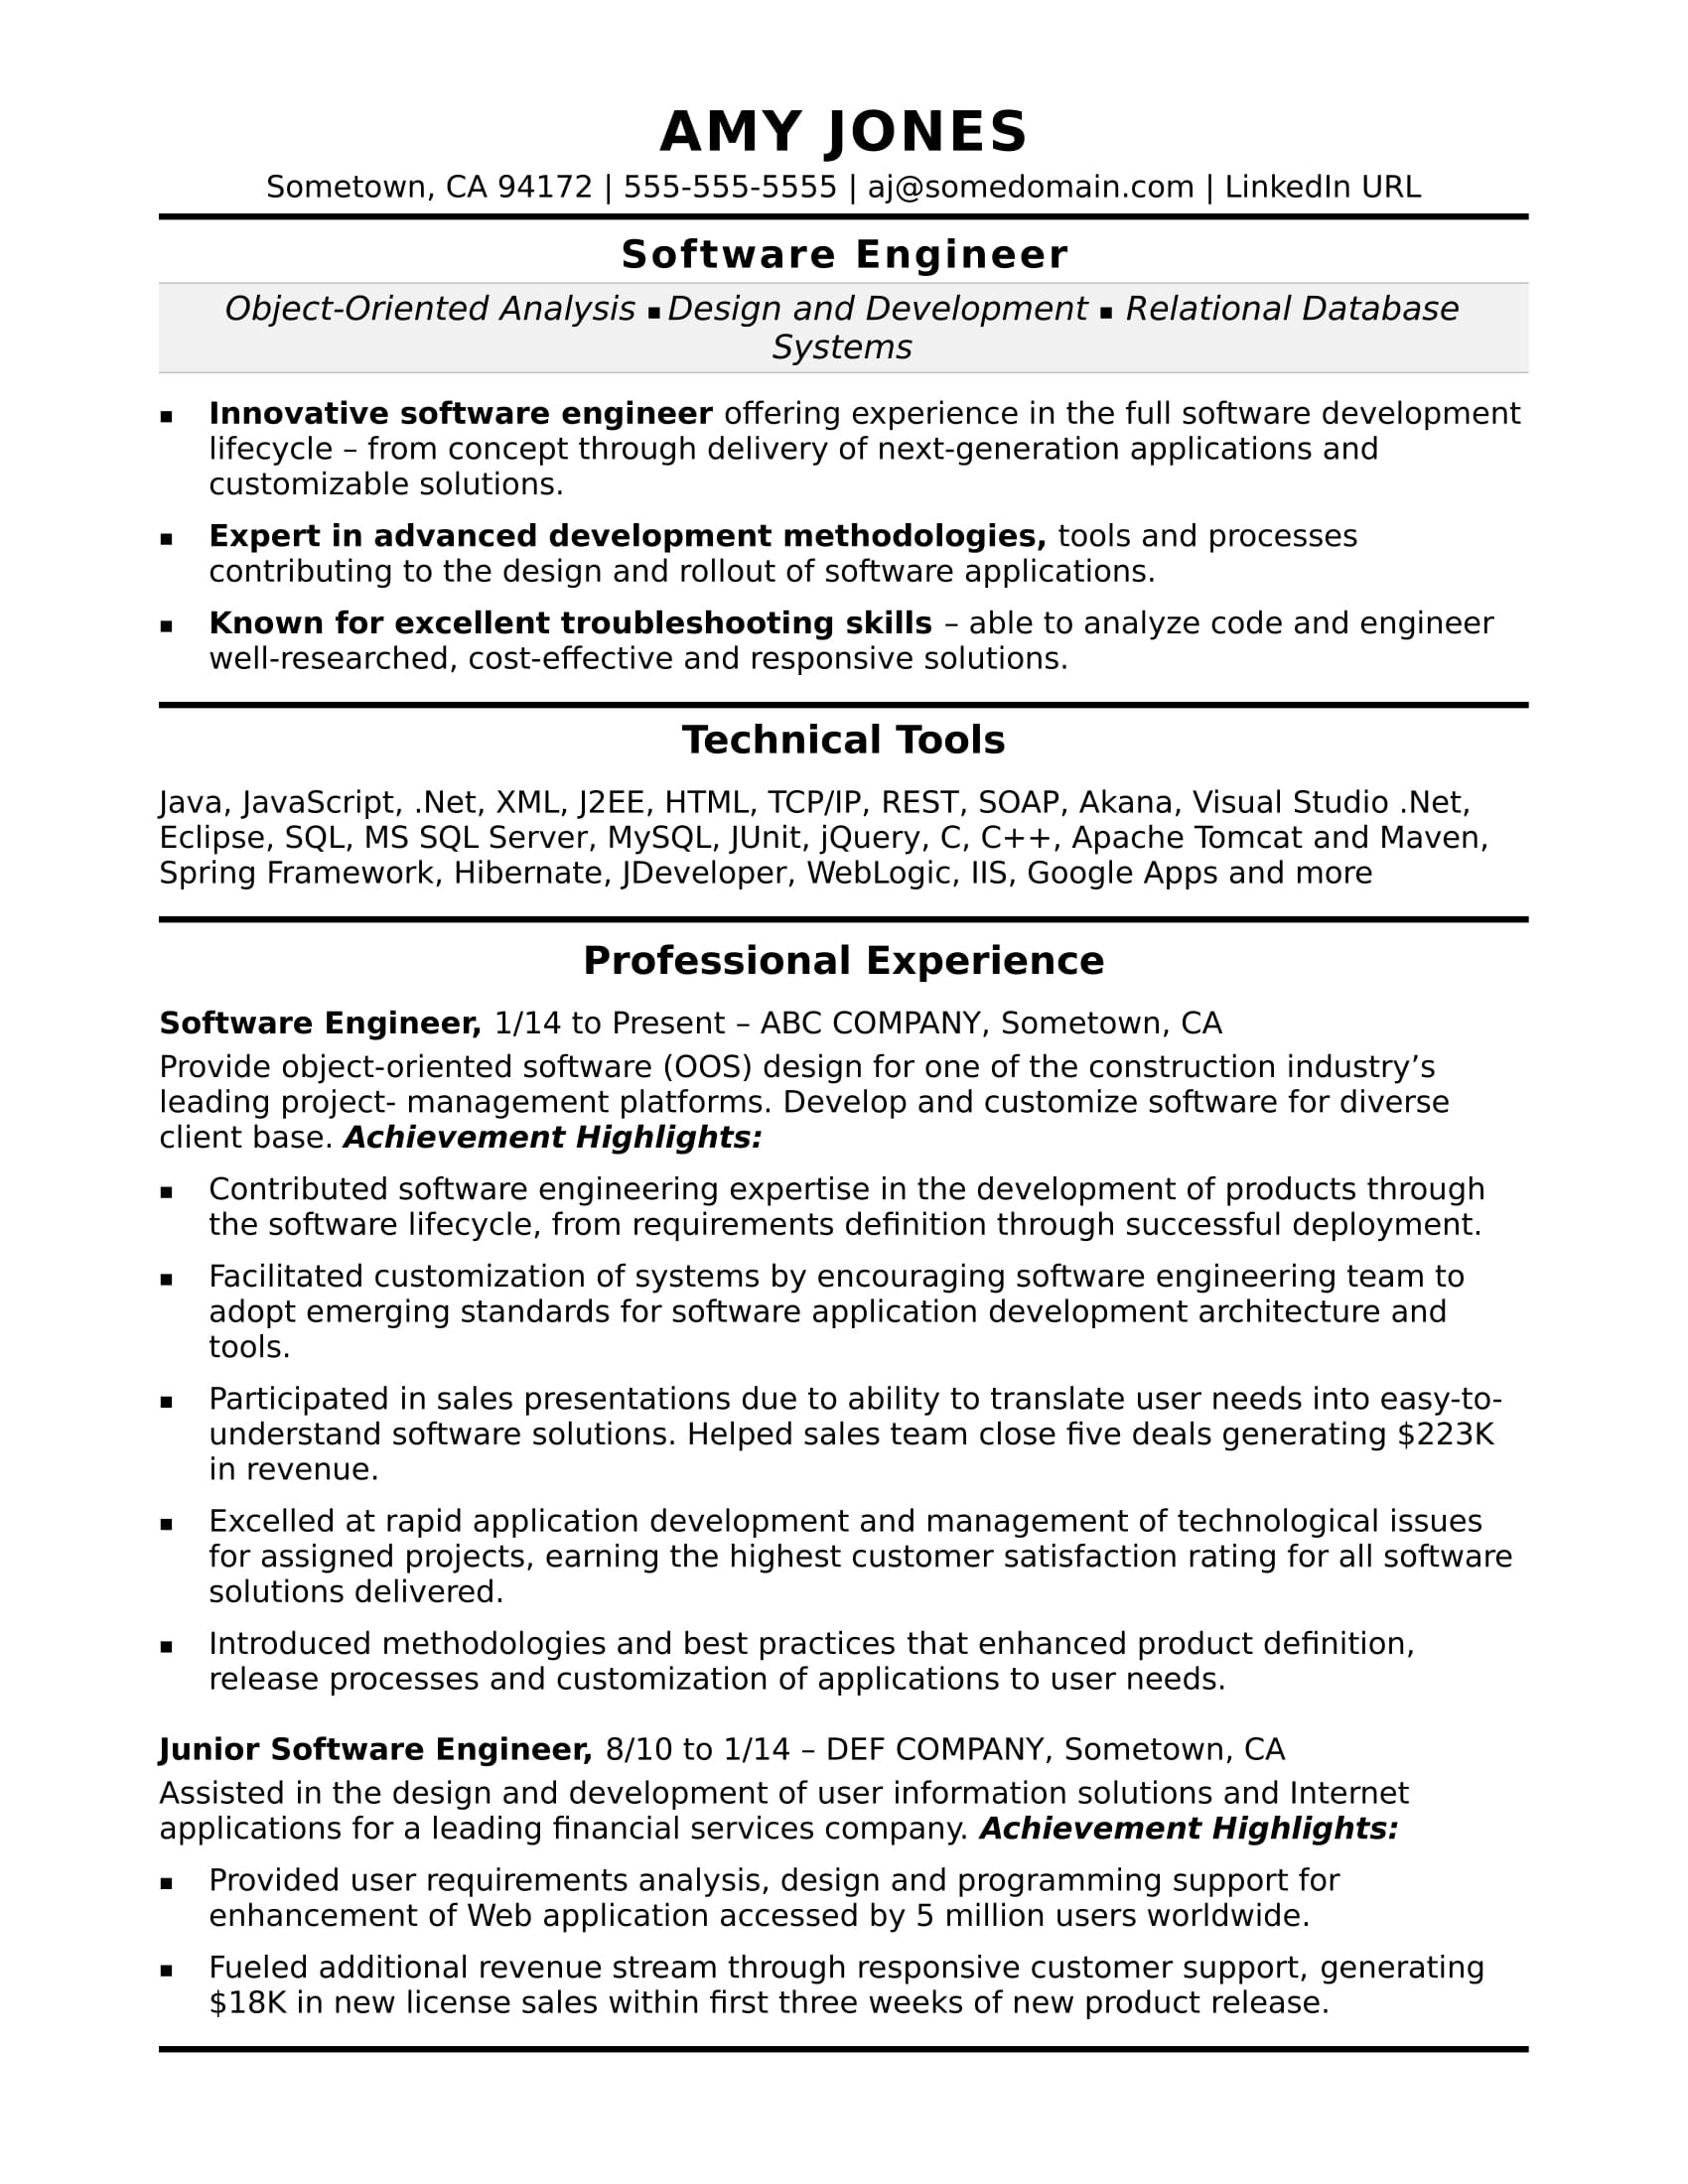 1 Year Experience software Engineer Resume Sample software Engineer Resume Monster.com